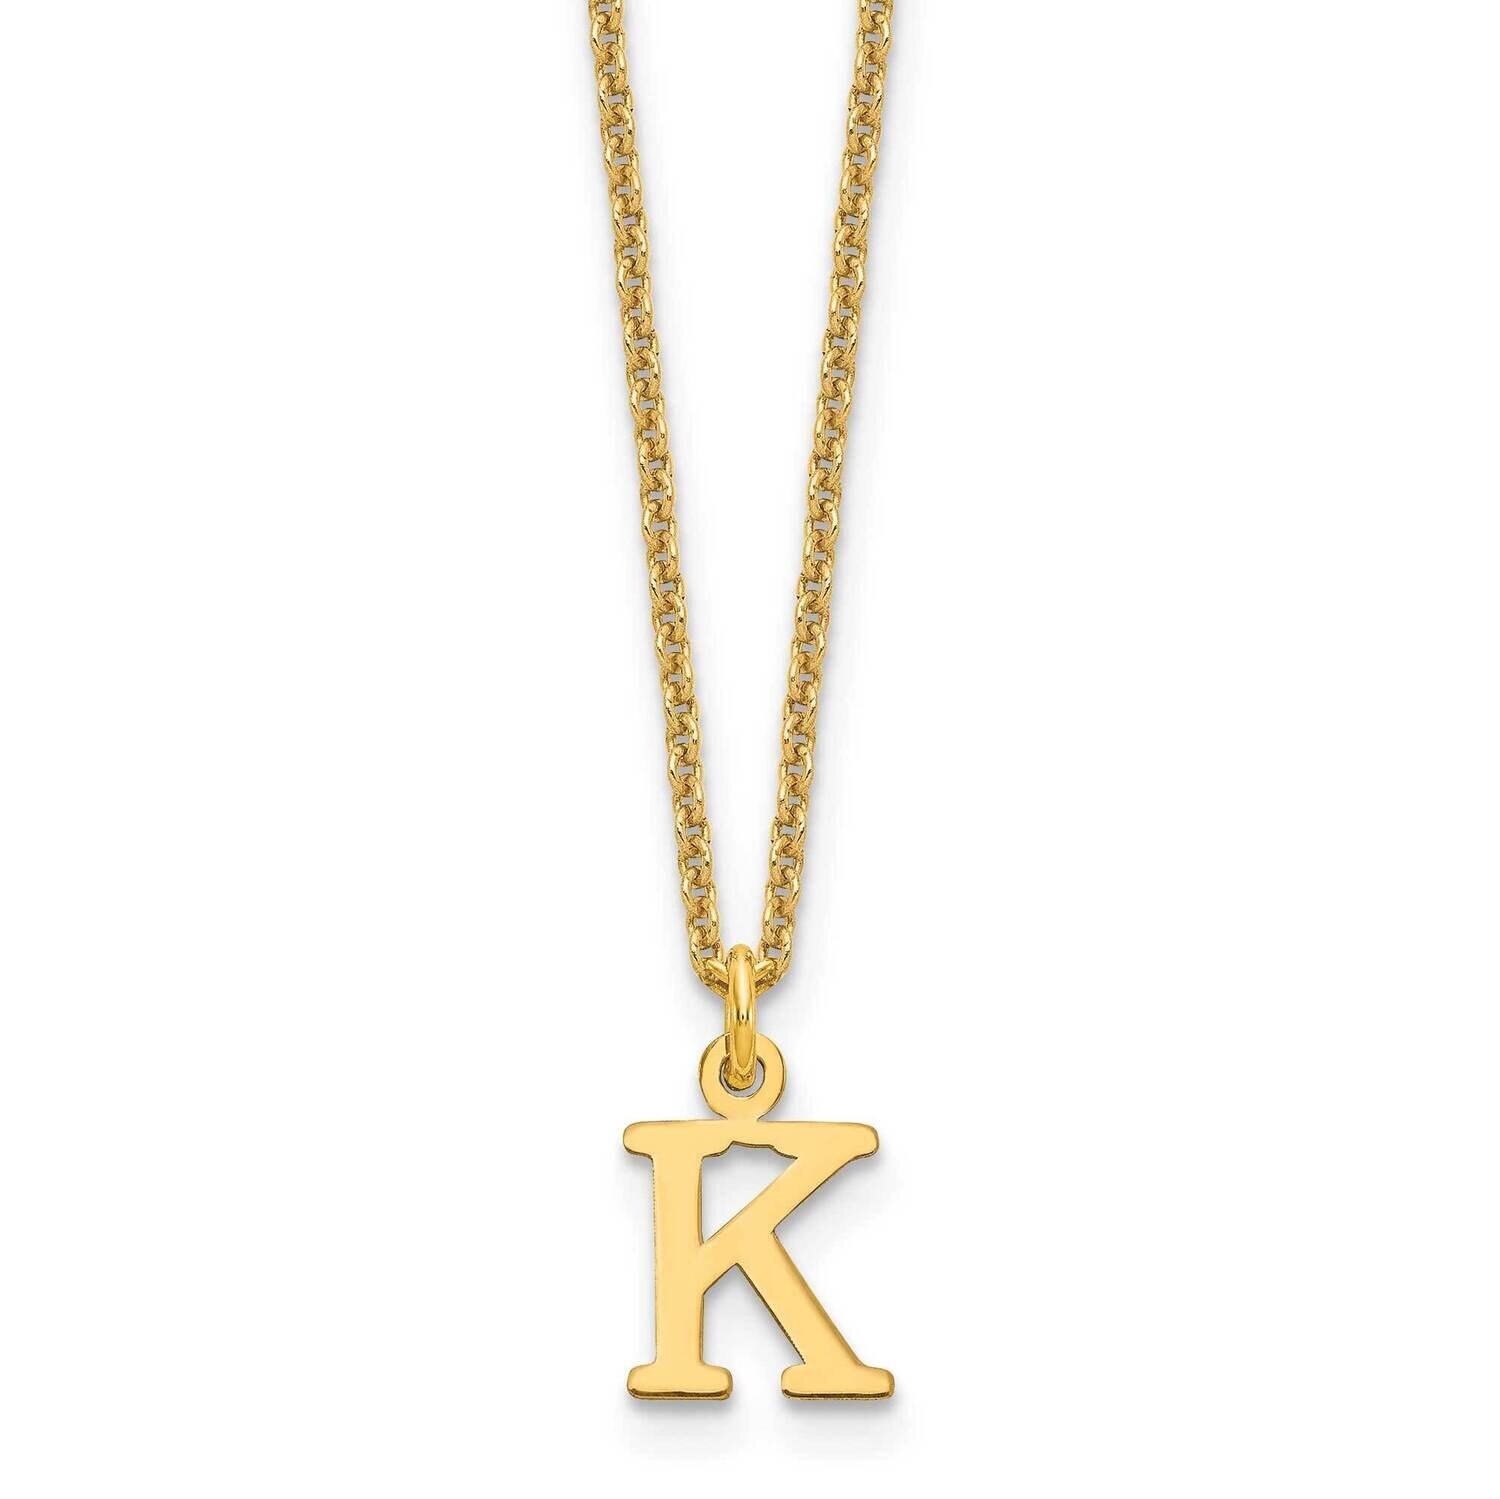 Letter K Initial Pendant with Chain 14k Gold Cutout XNA727Y/K